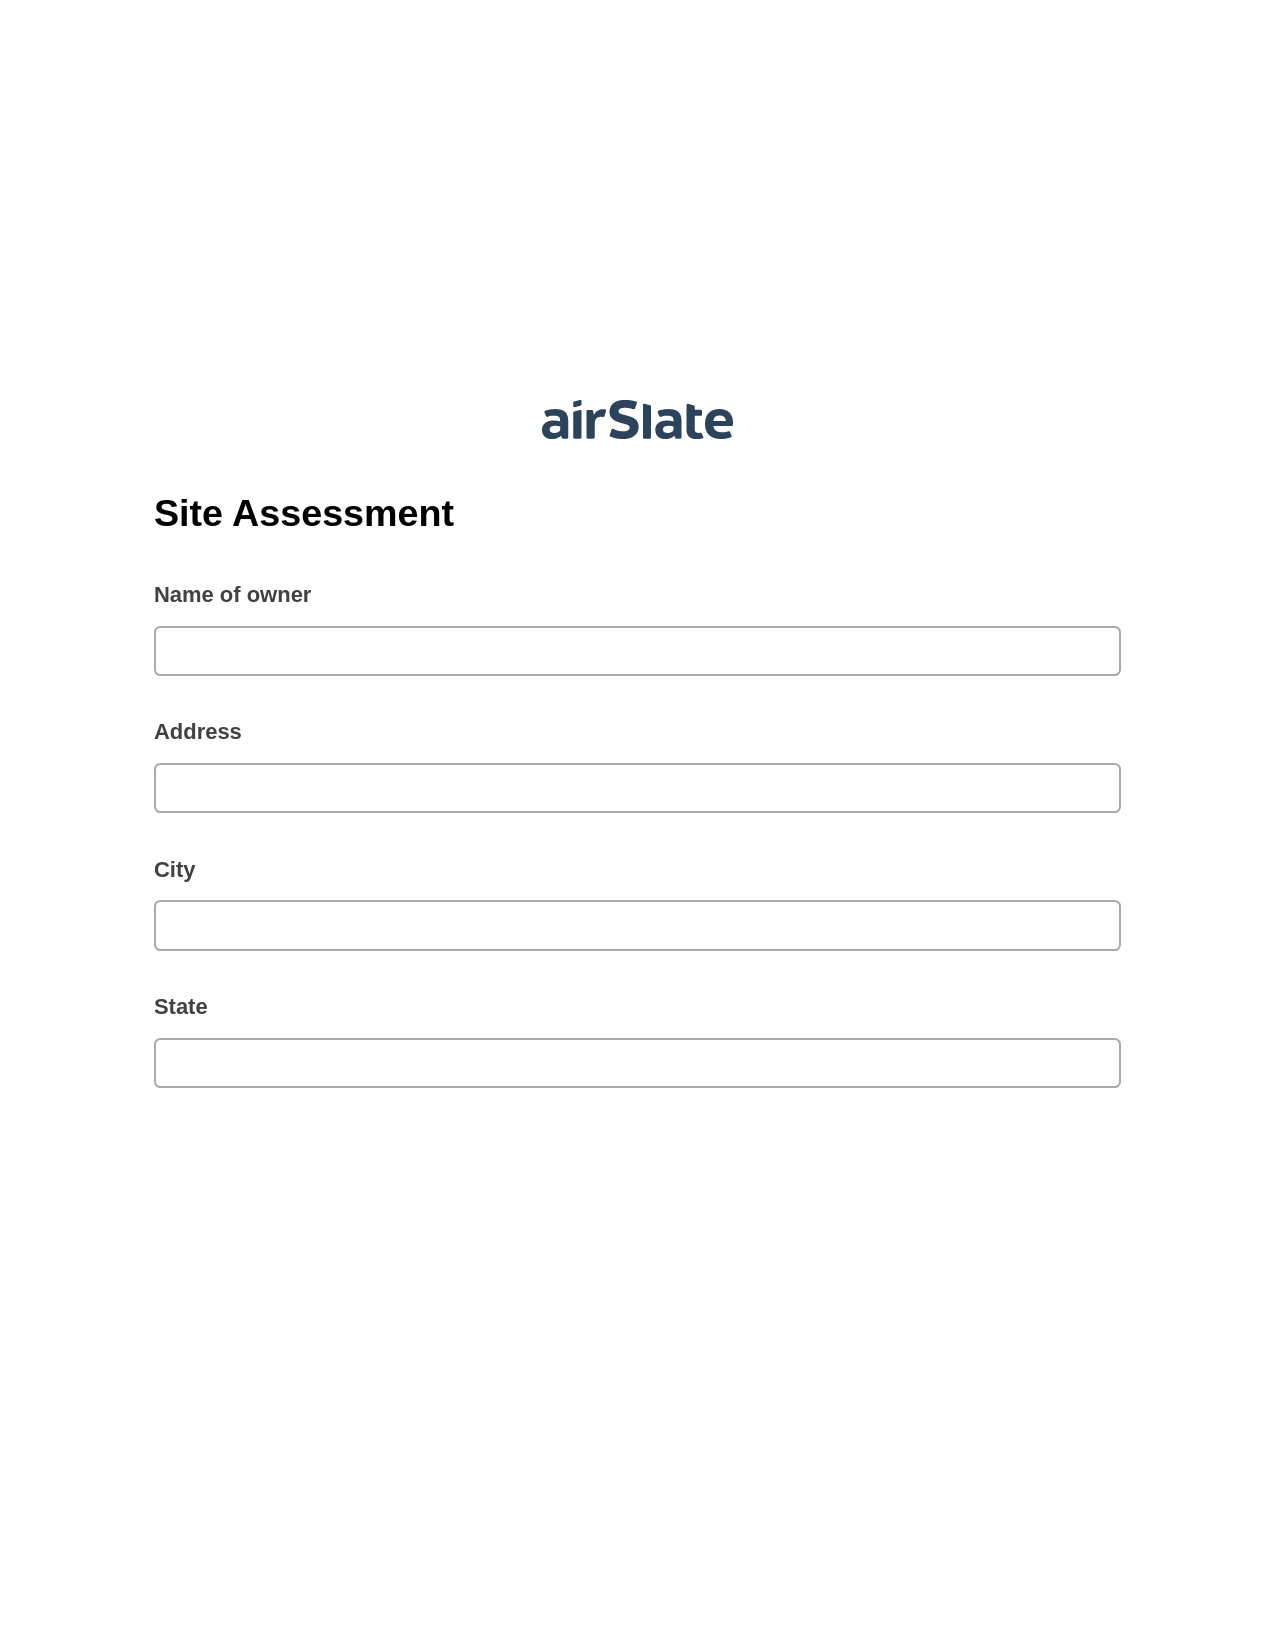 Multirole Site Assessment Pre-fill Slate from MS Dynamics 365 Records Bot, Send a Slate with Roles Bot, Export to Excel 365 Bot